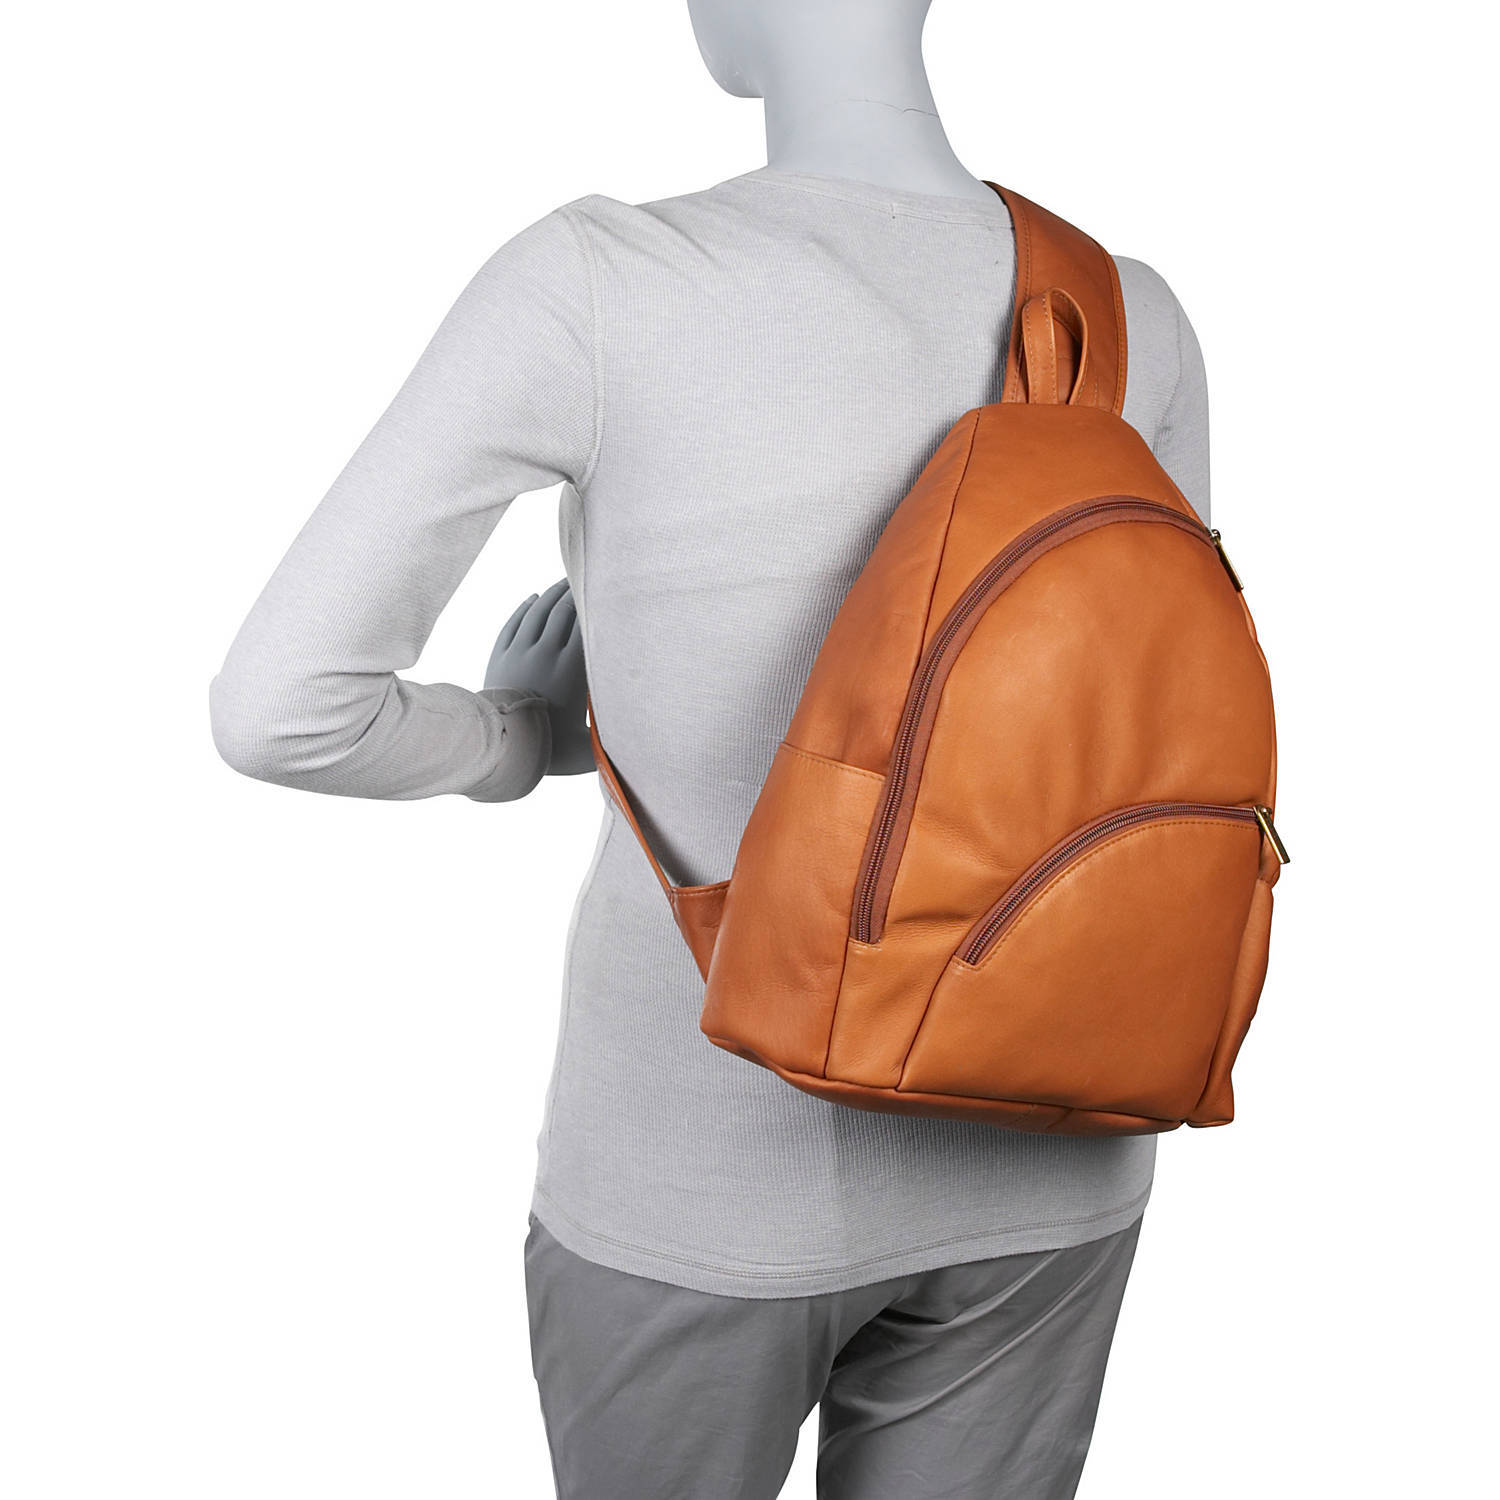 Le Donne Leather Two Zip Sling Pack LD-2012 - image 5 of 5